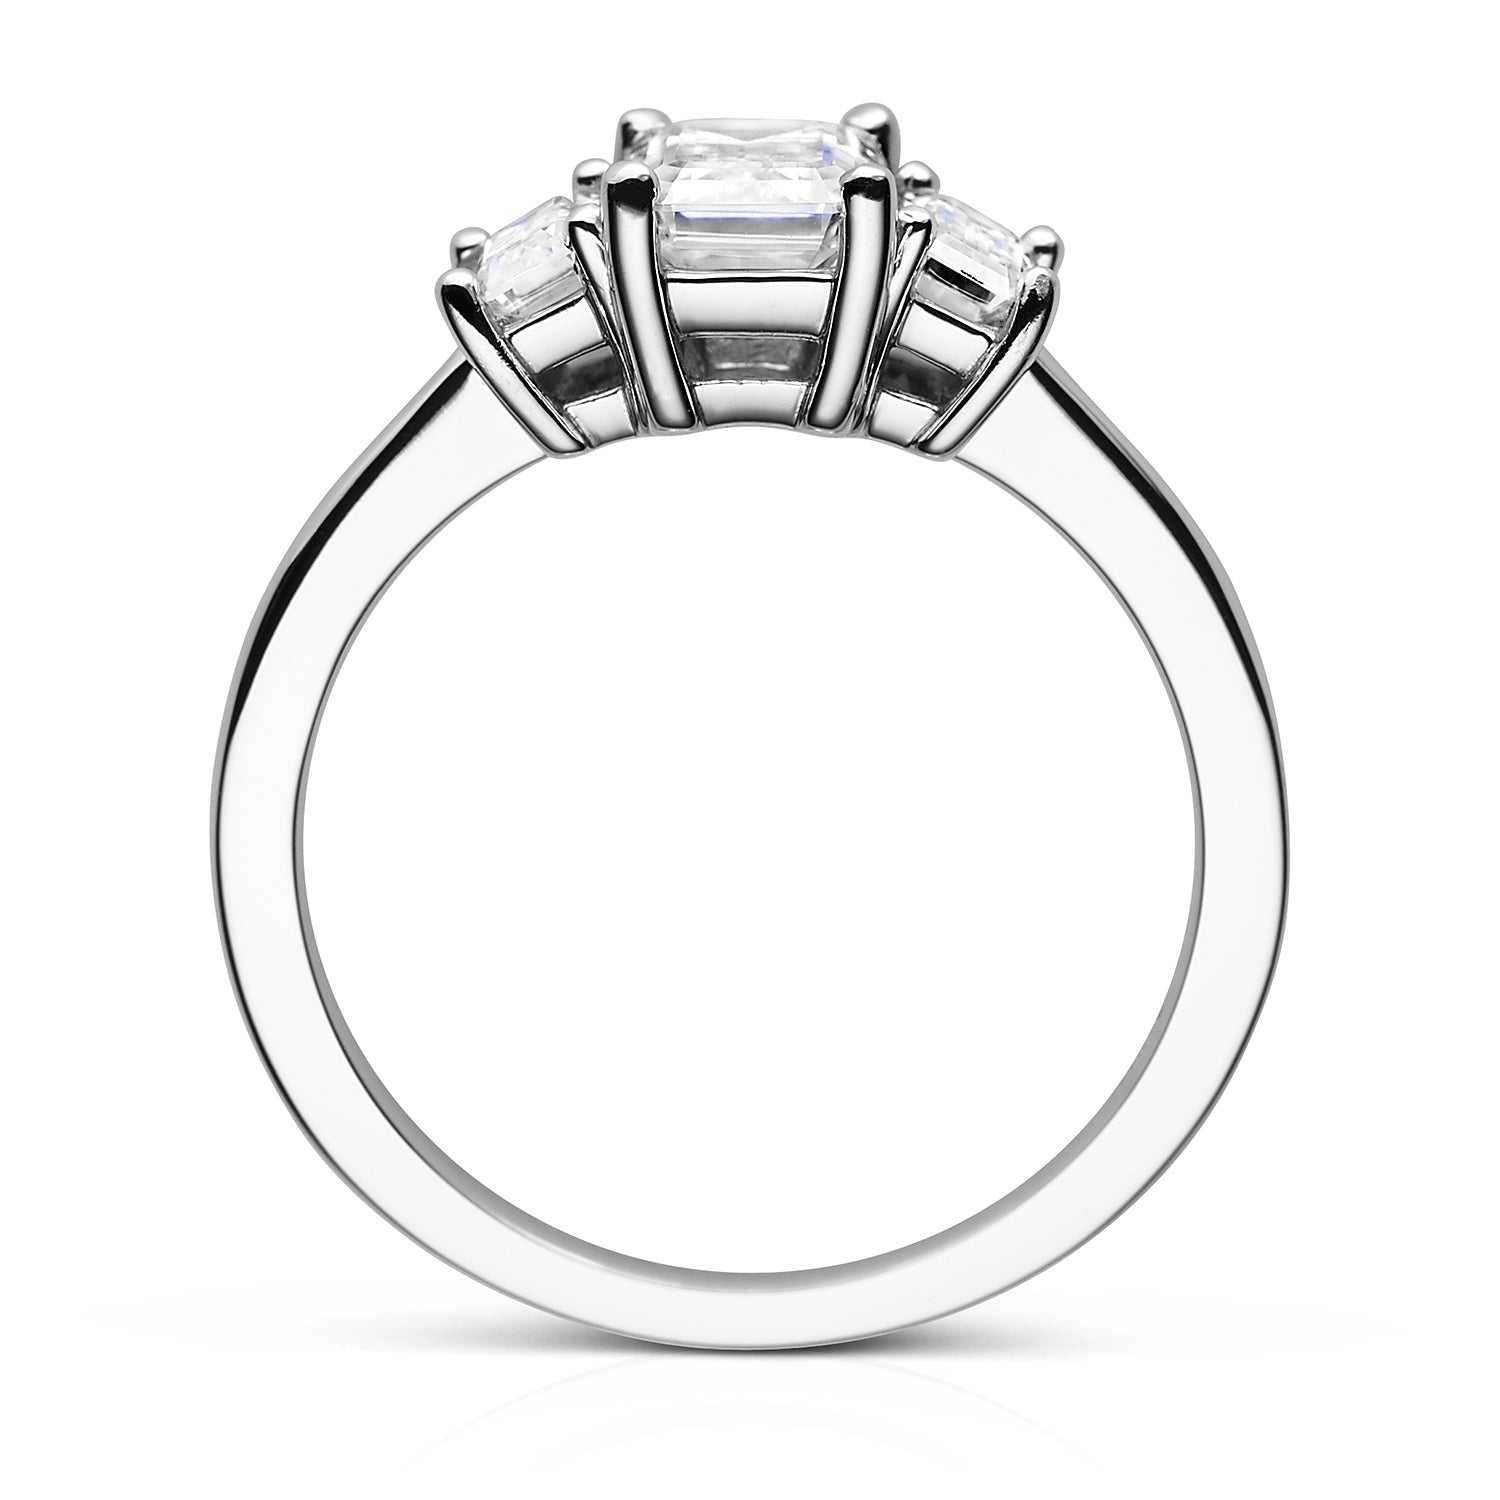 Charles & Colvard Moissanite Emerald Cut Three Stone Ring in White Gold-612941 - Jewelry by Johan